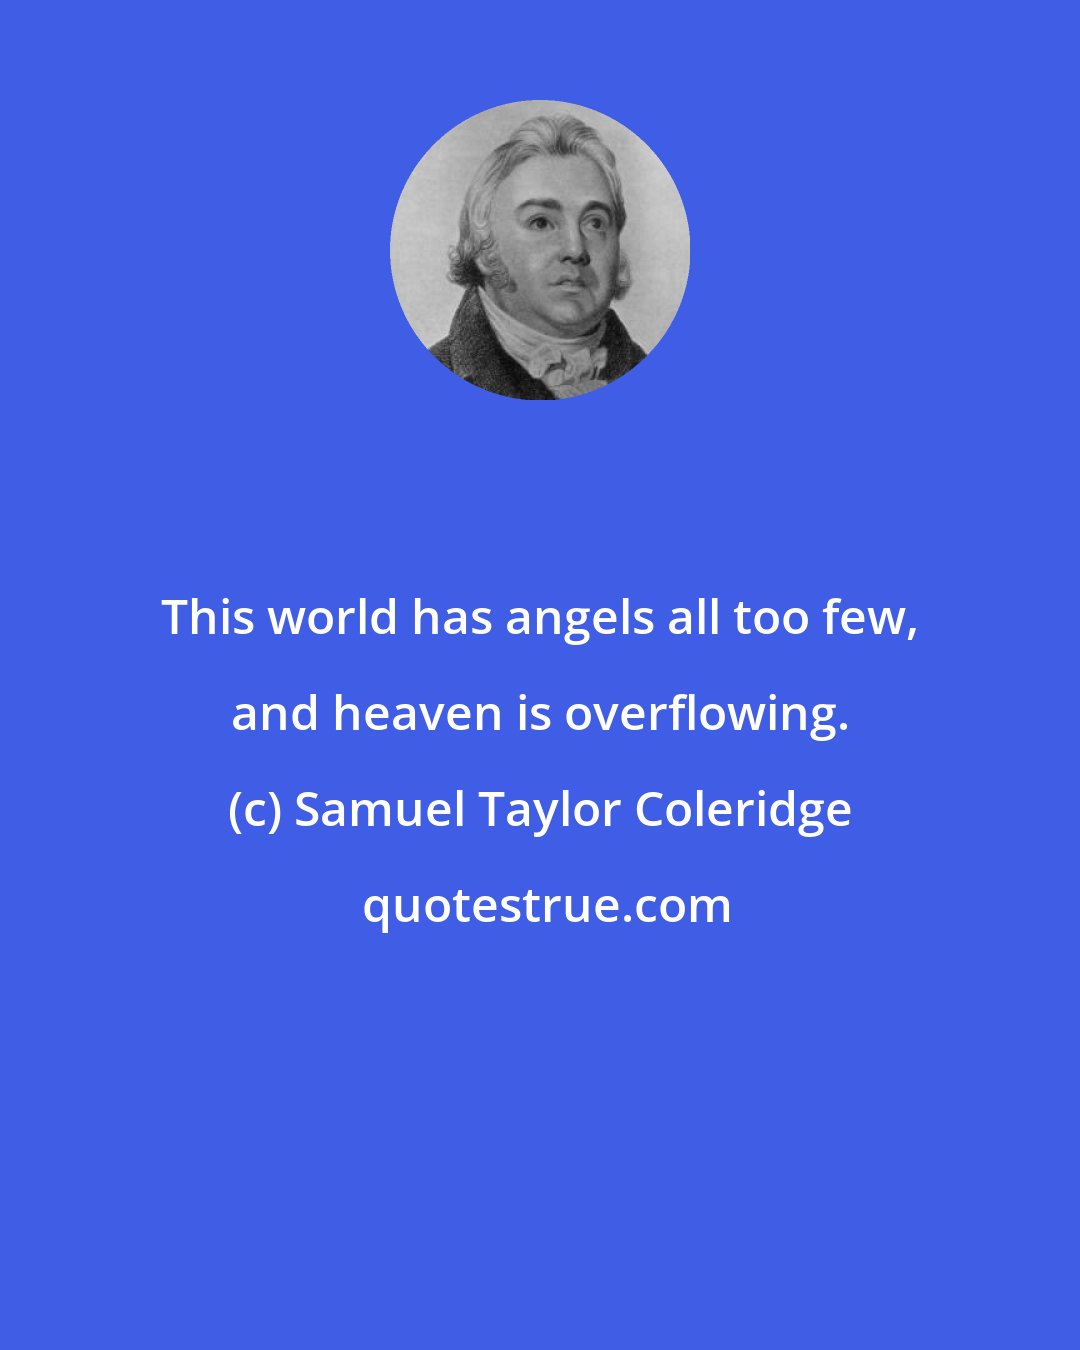 Samuel Taylor Coleridge: This world has angels all too few, and heaven is overflowing.